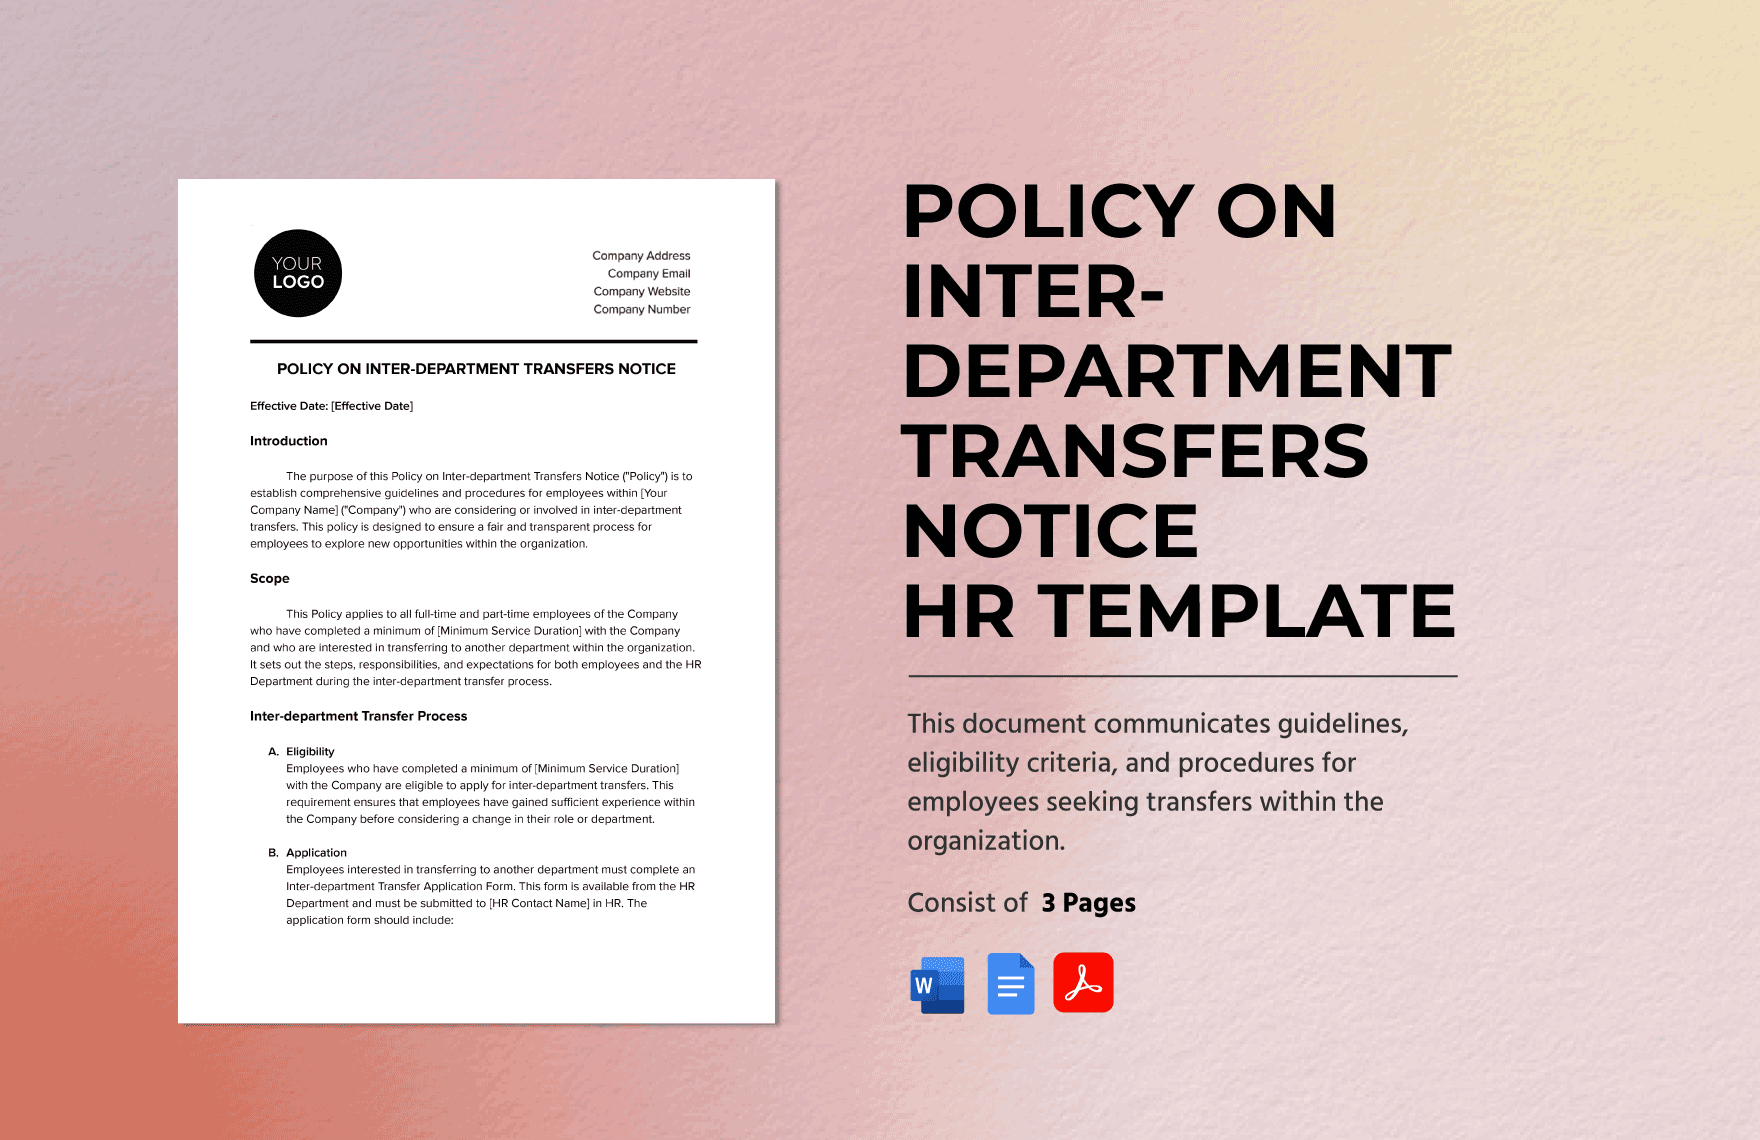 Policy on Inter-department Transfers Notice HR Template